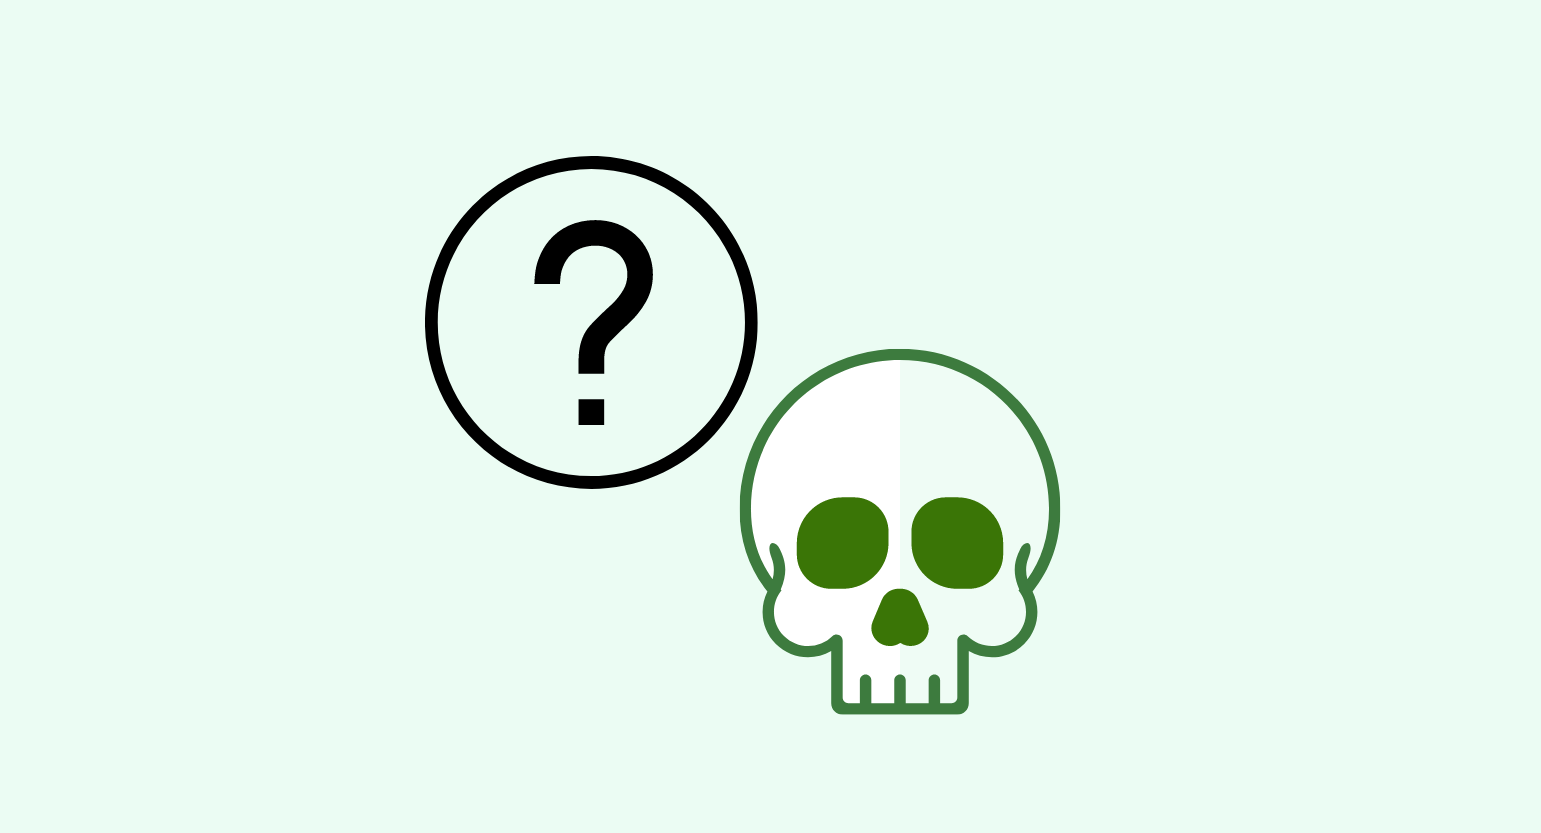 Illustration of a question mark and skull. Overdose & Death concept.